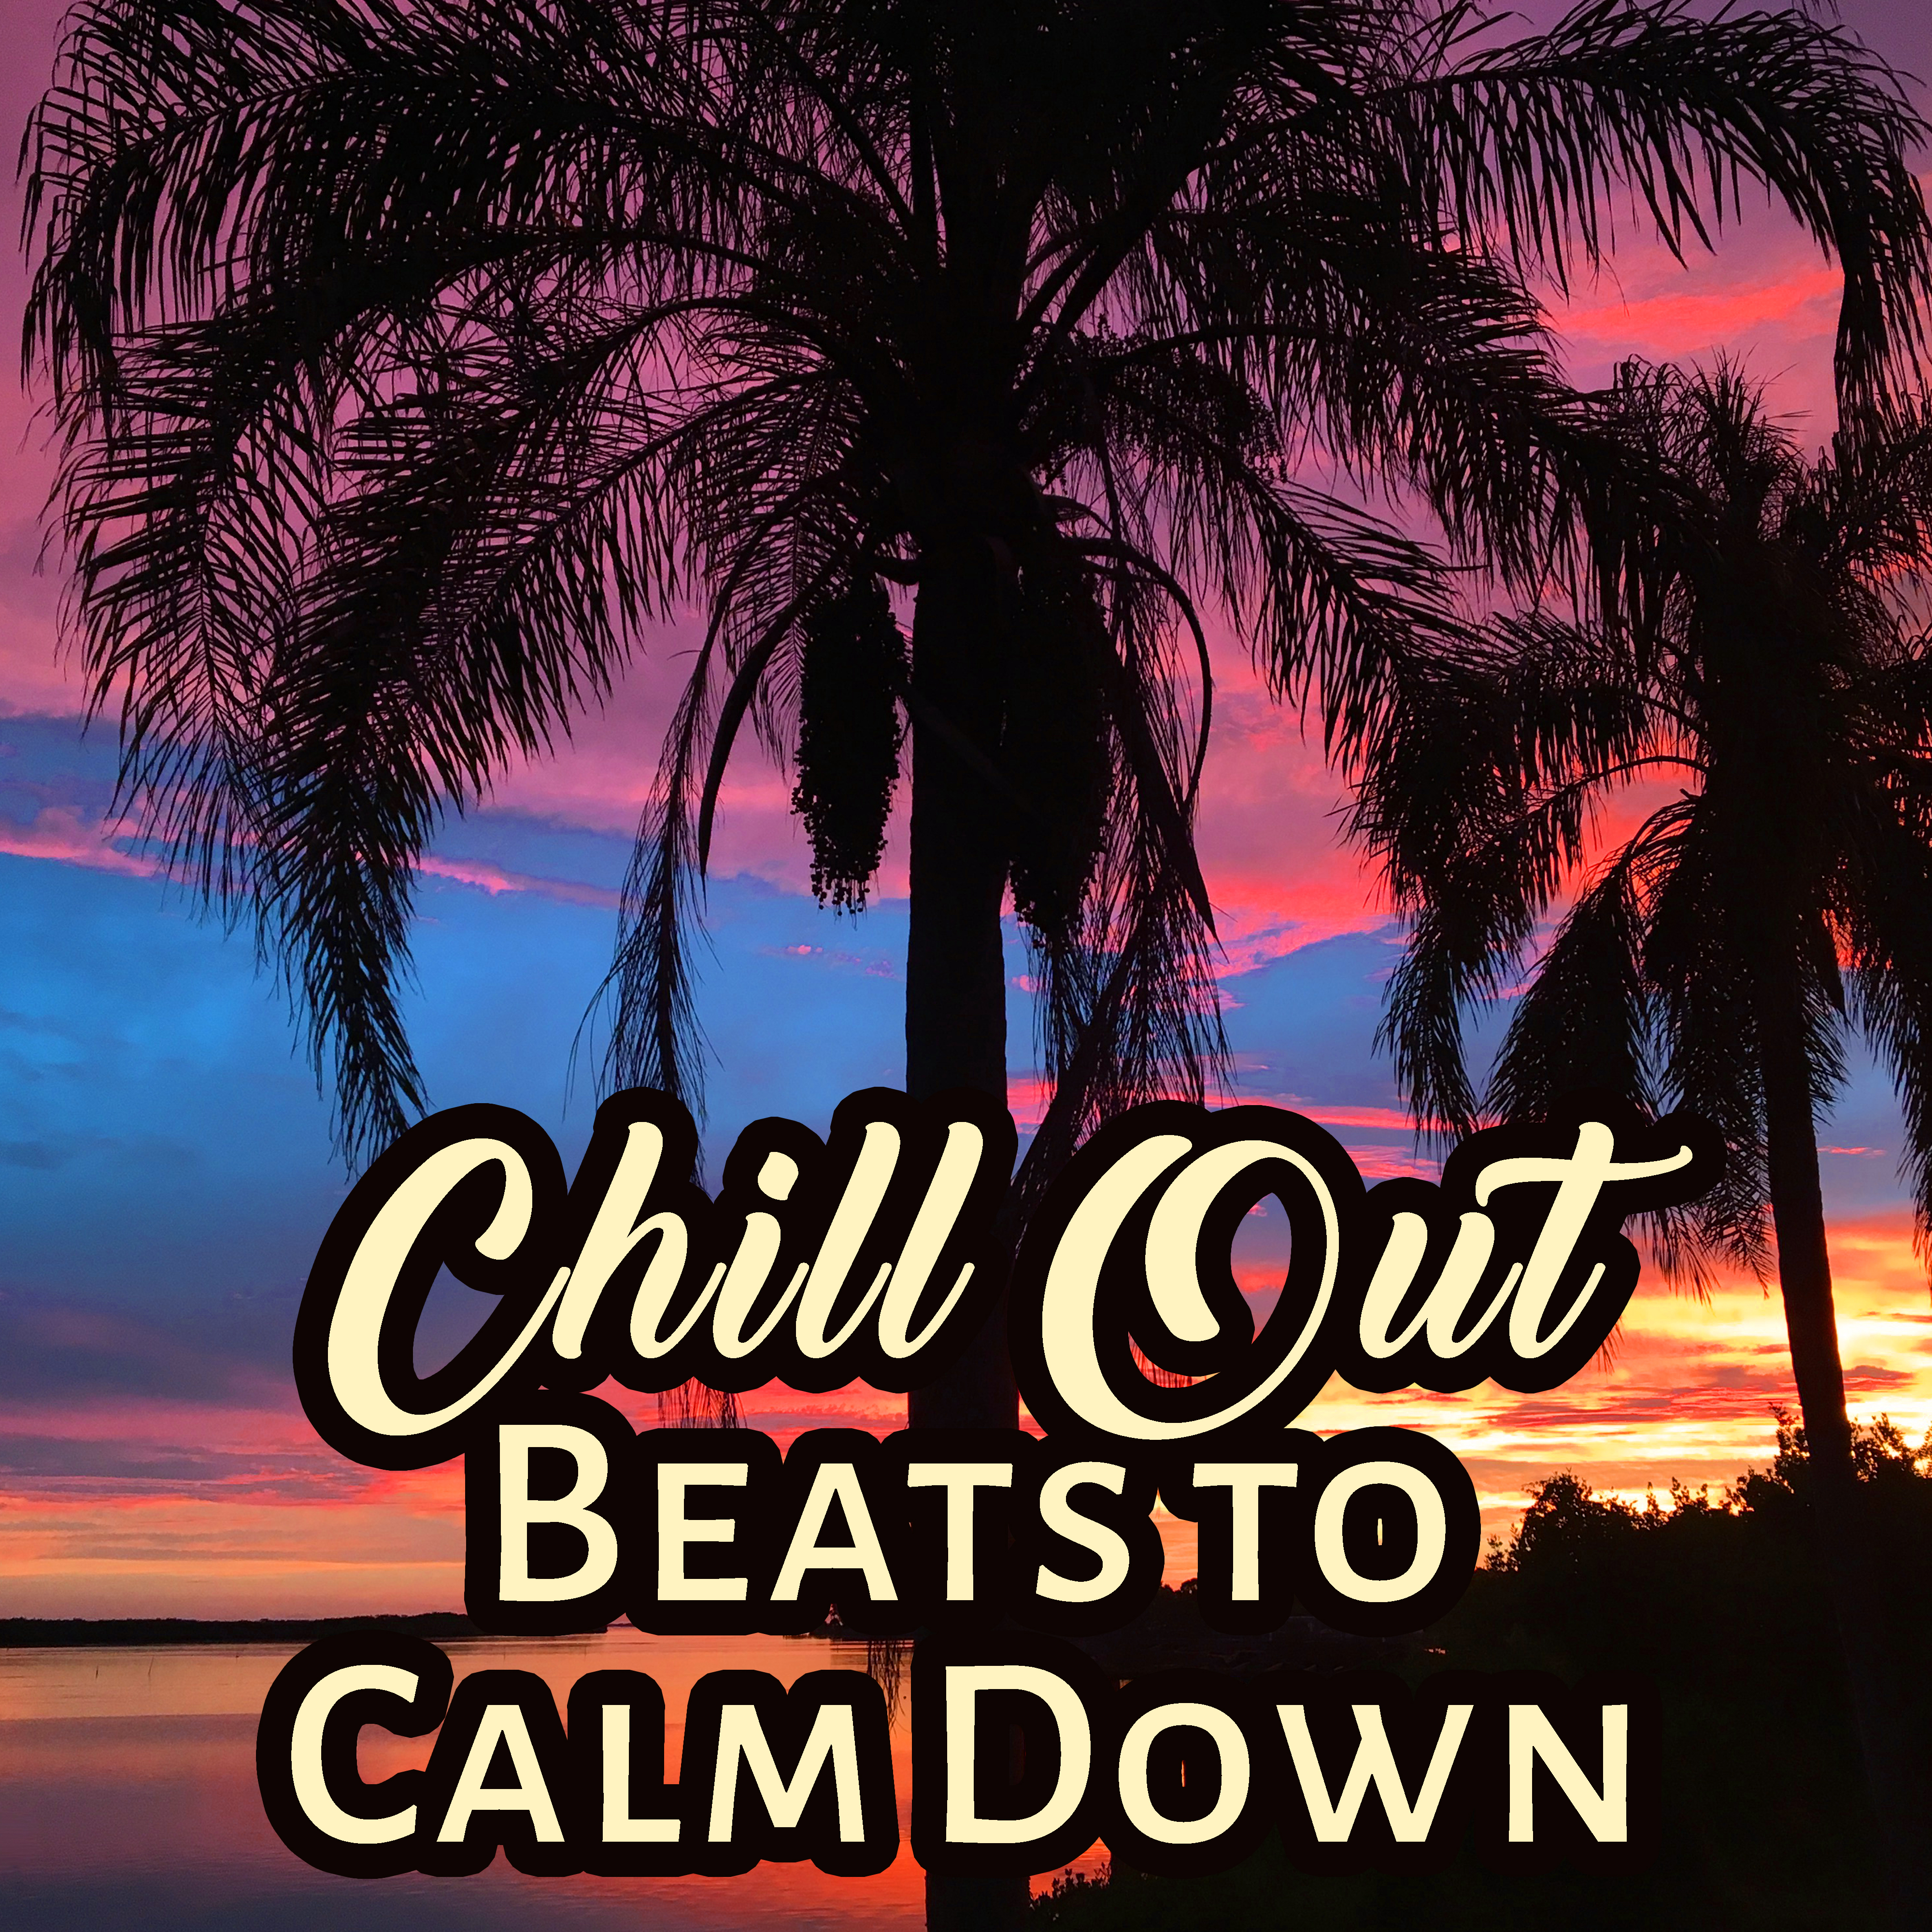 Chill Out Beats to Calm Down  Easy Listening, Relaxing Beats, Beach Lounge, Chilled Vibes